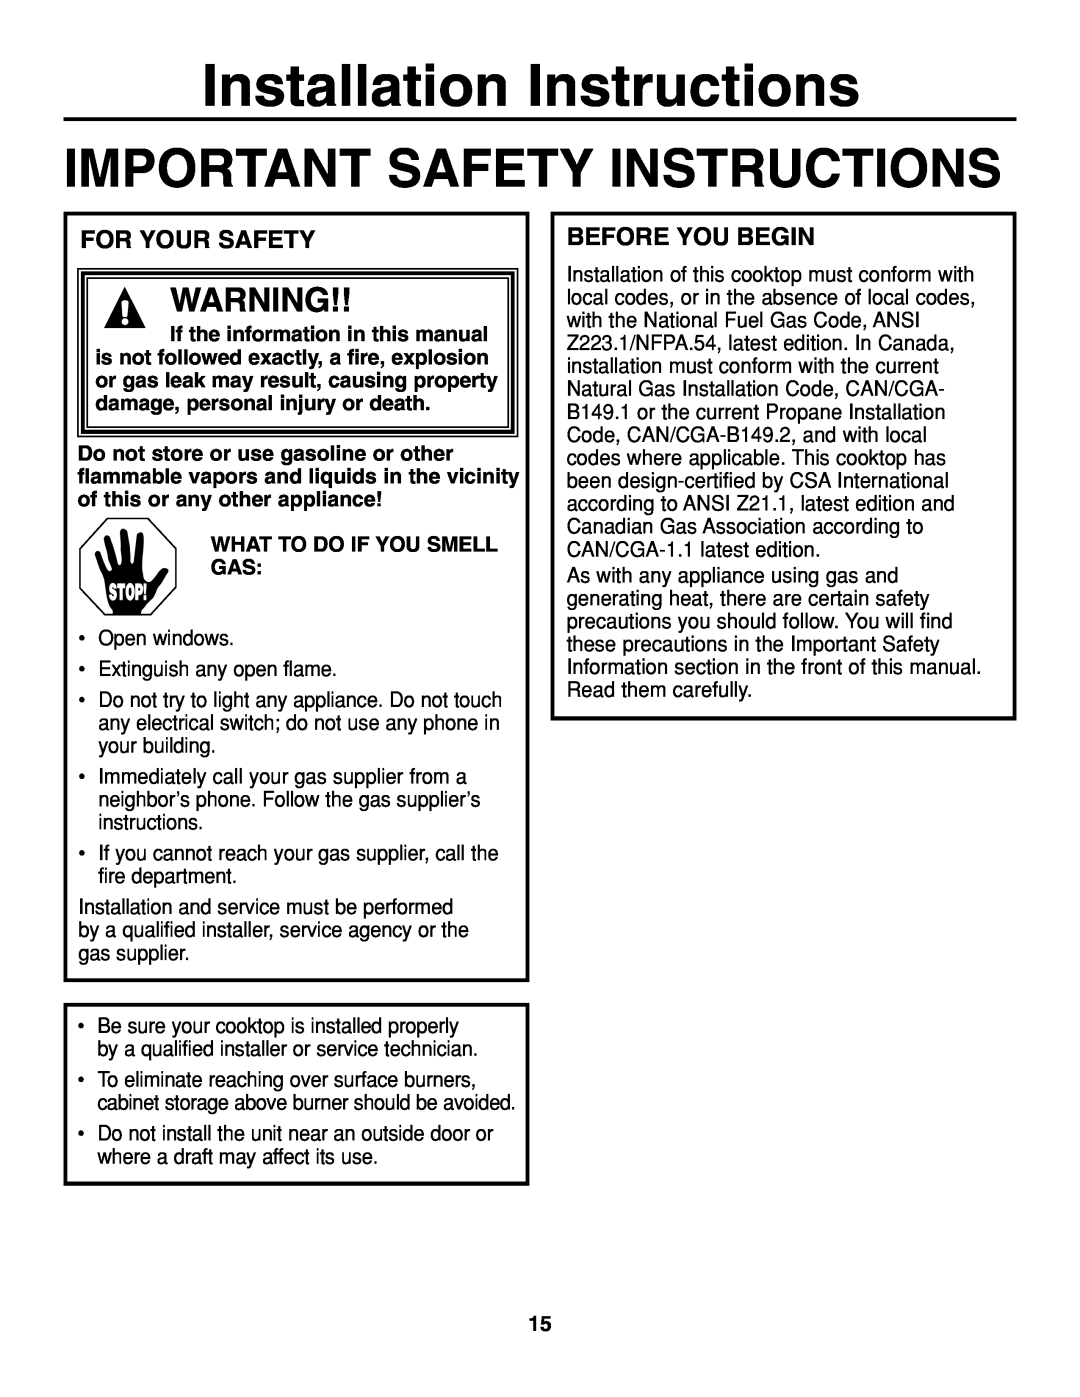 GE JGP337 Installation Instructions, Important Safety Instructions, For Your Safety, Before You Begin, Stop 